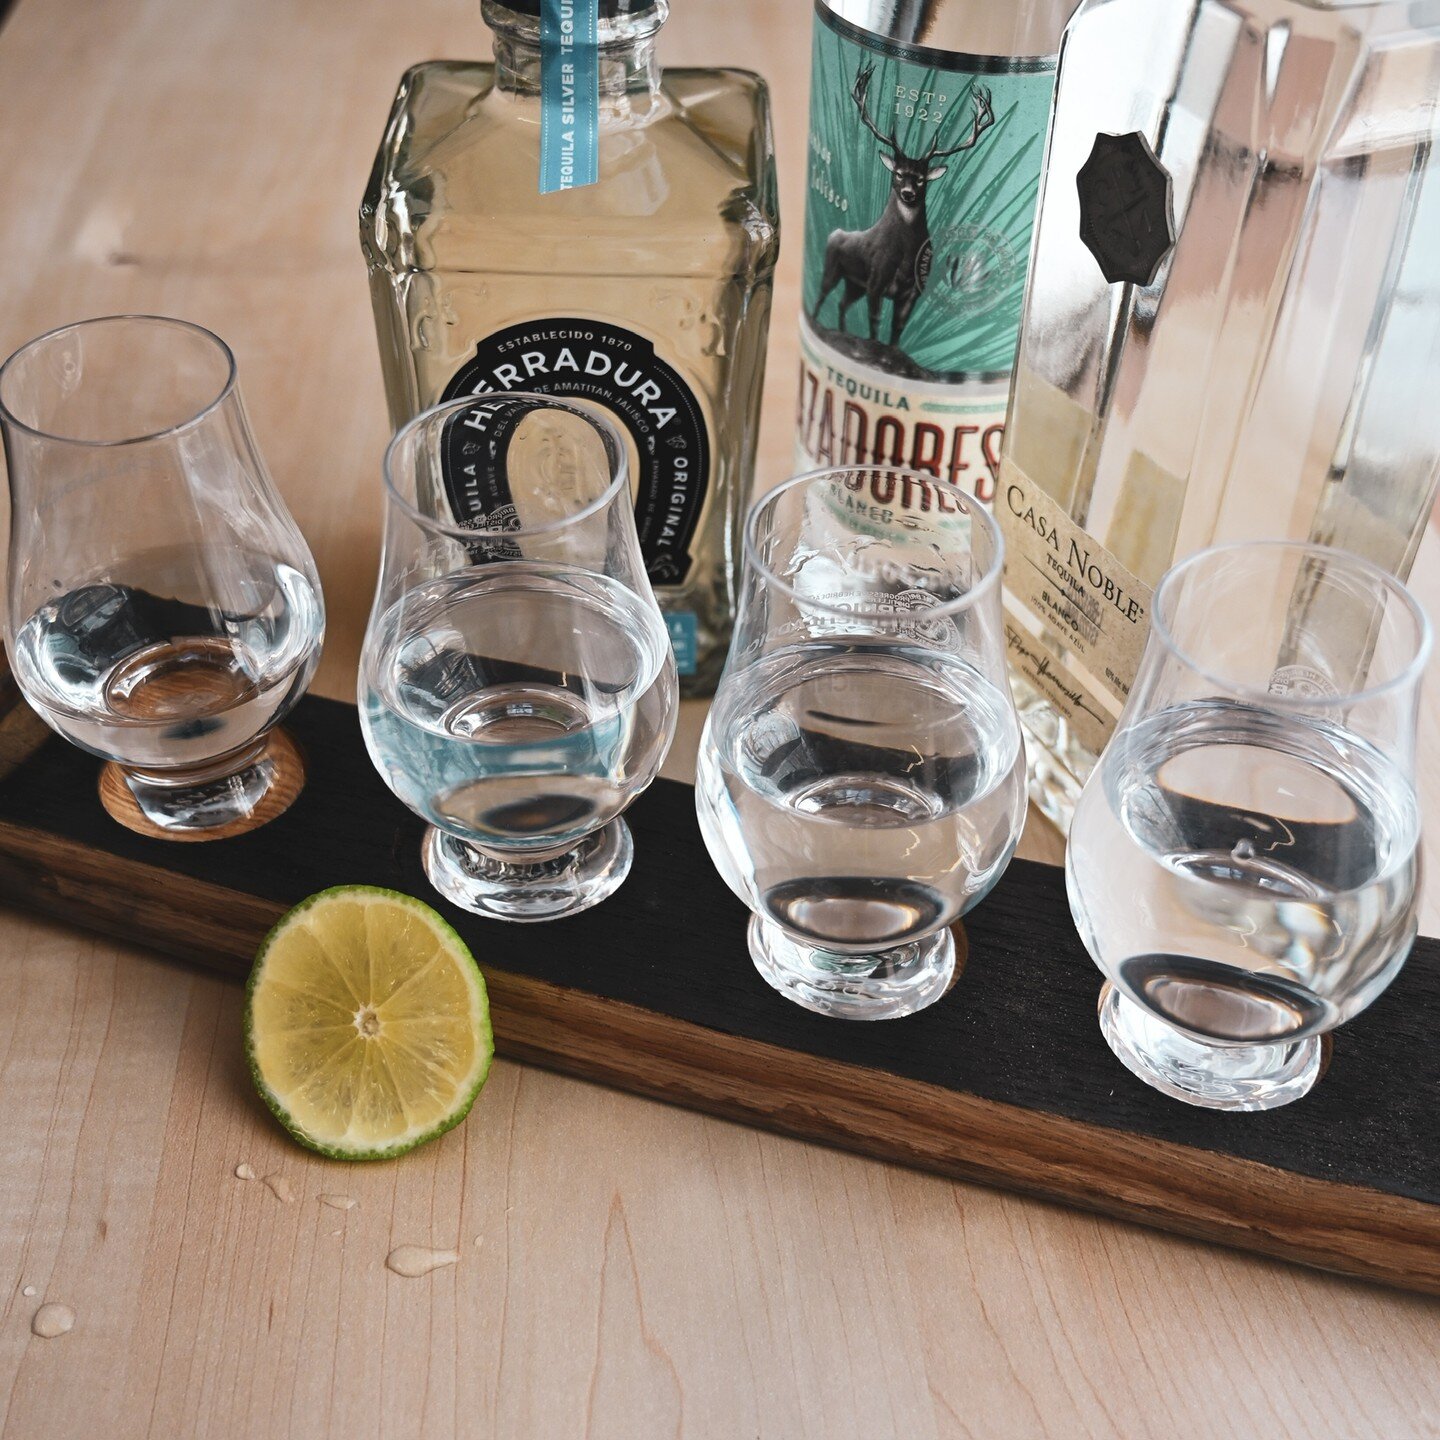 Bootlegger's Tasting Series! Kicking it off with a Blanco tequila tasting on March 19th at Plonk! Learn and understand the distinction between the four different types of tequilas, explore art of crafting the perfect margarita and MORE!
.
.
.
#privat